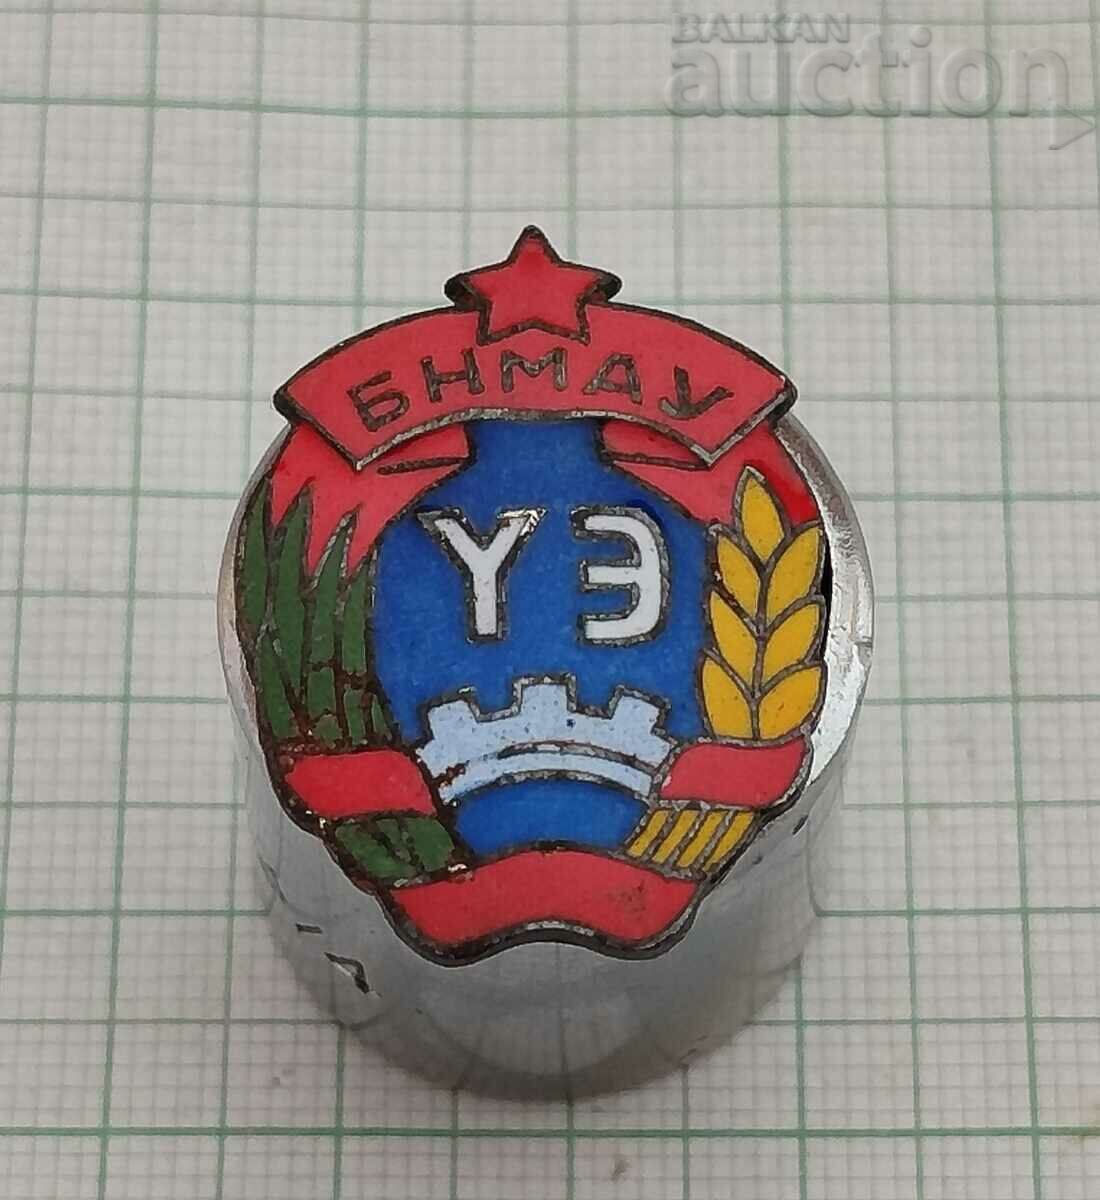 MONGOLIA BNMAU NUMBERED BADGE EMAIL